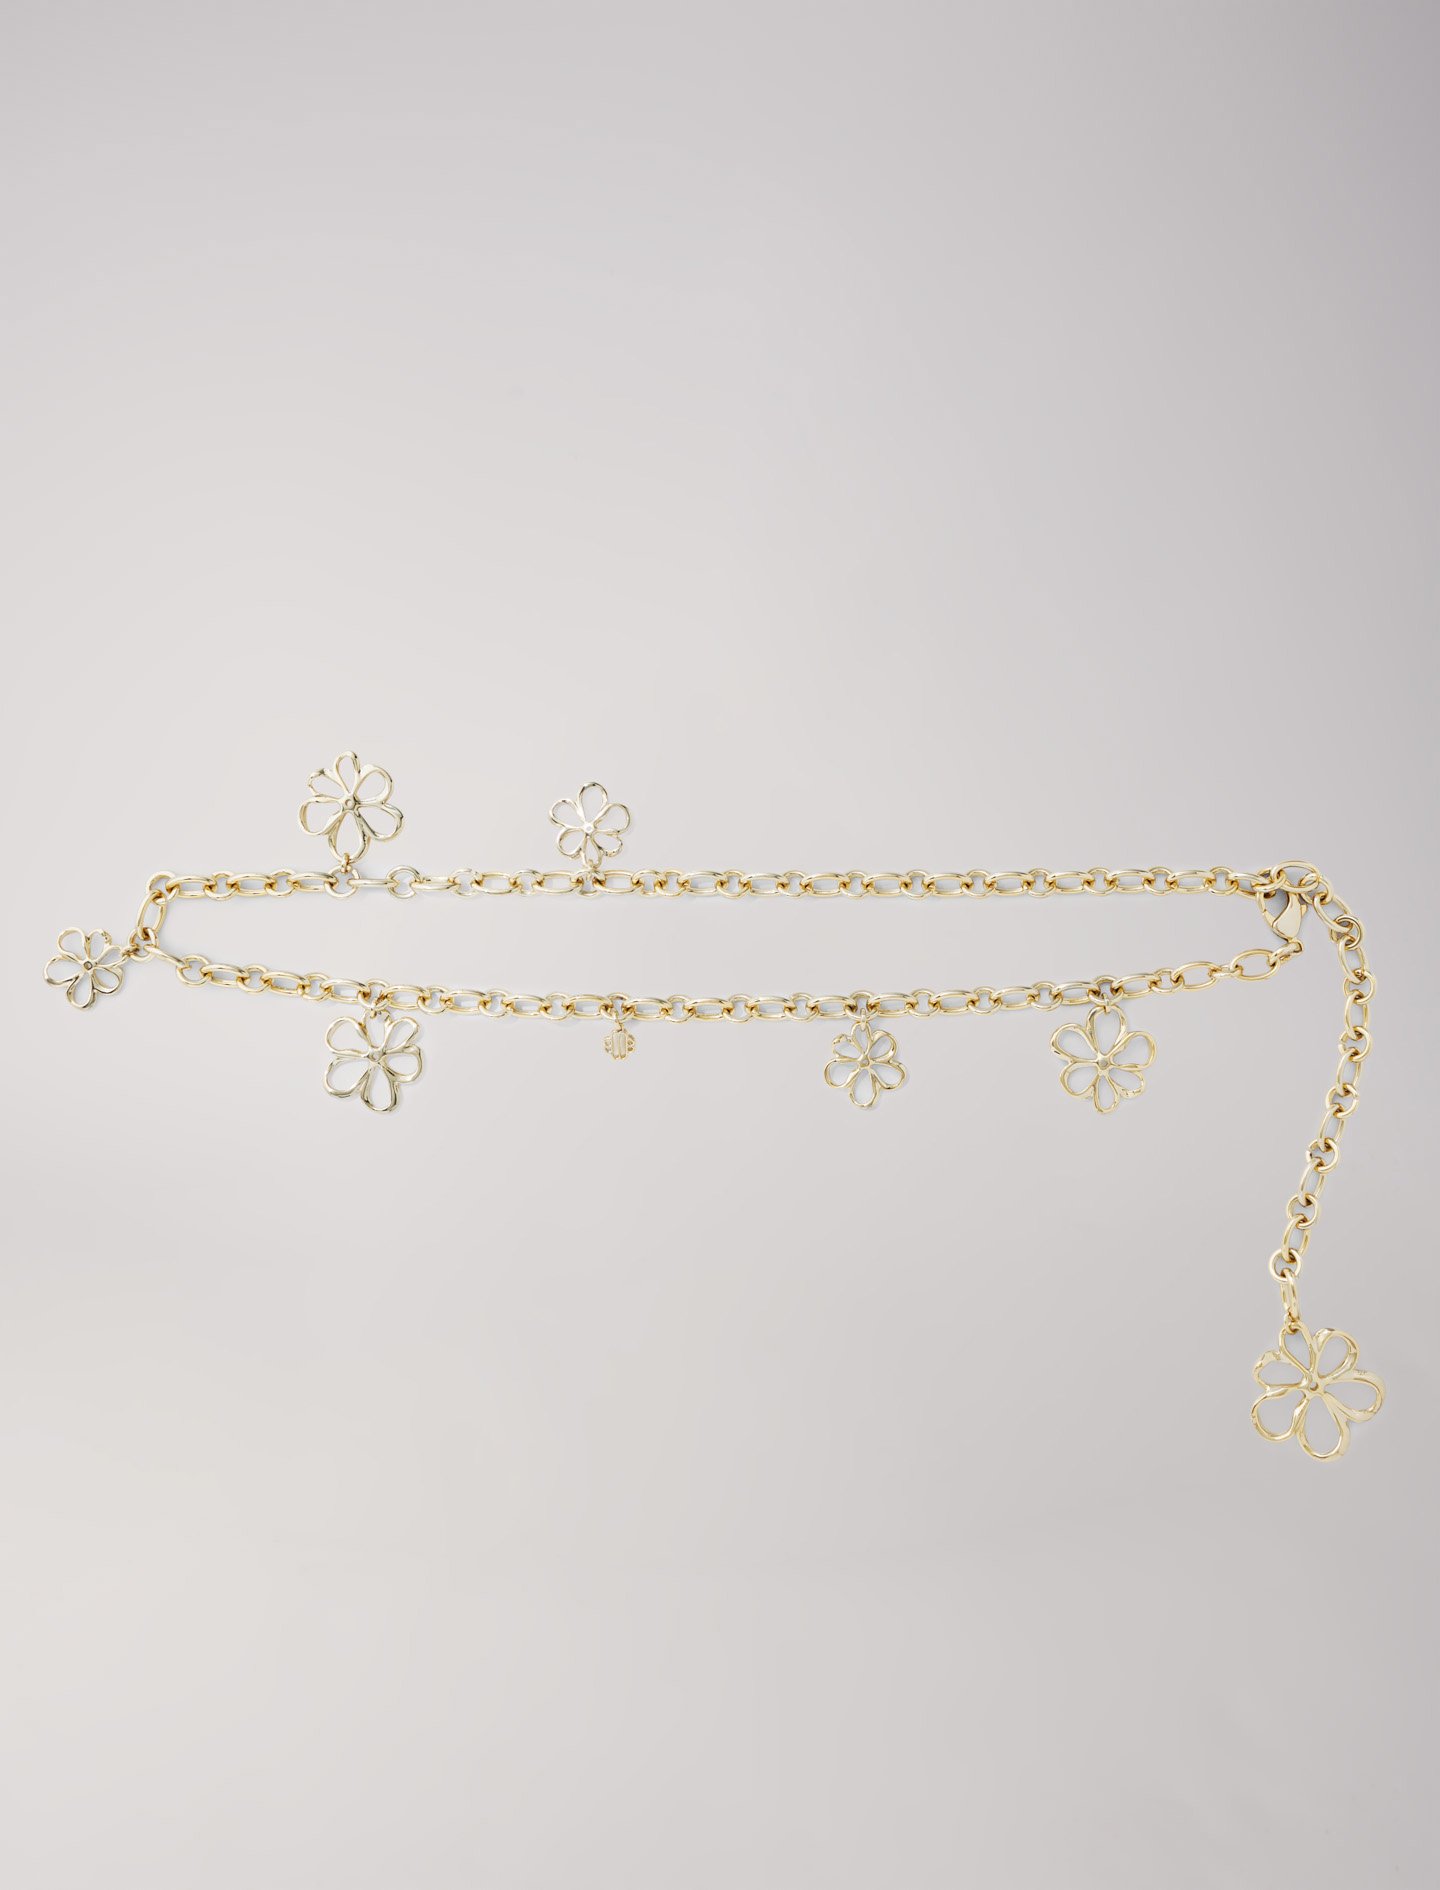 Mixte's iron Chain belt with flowers for Spring/Summer, size Mixte-Belts-US L / FR 3, in color Gold / Yellow